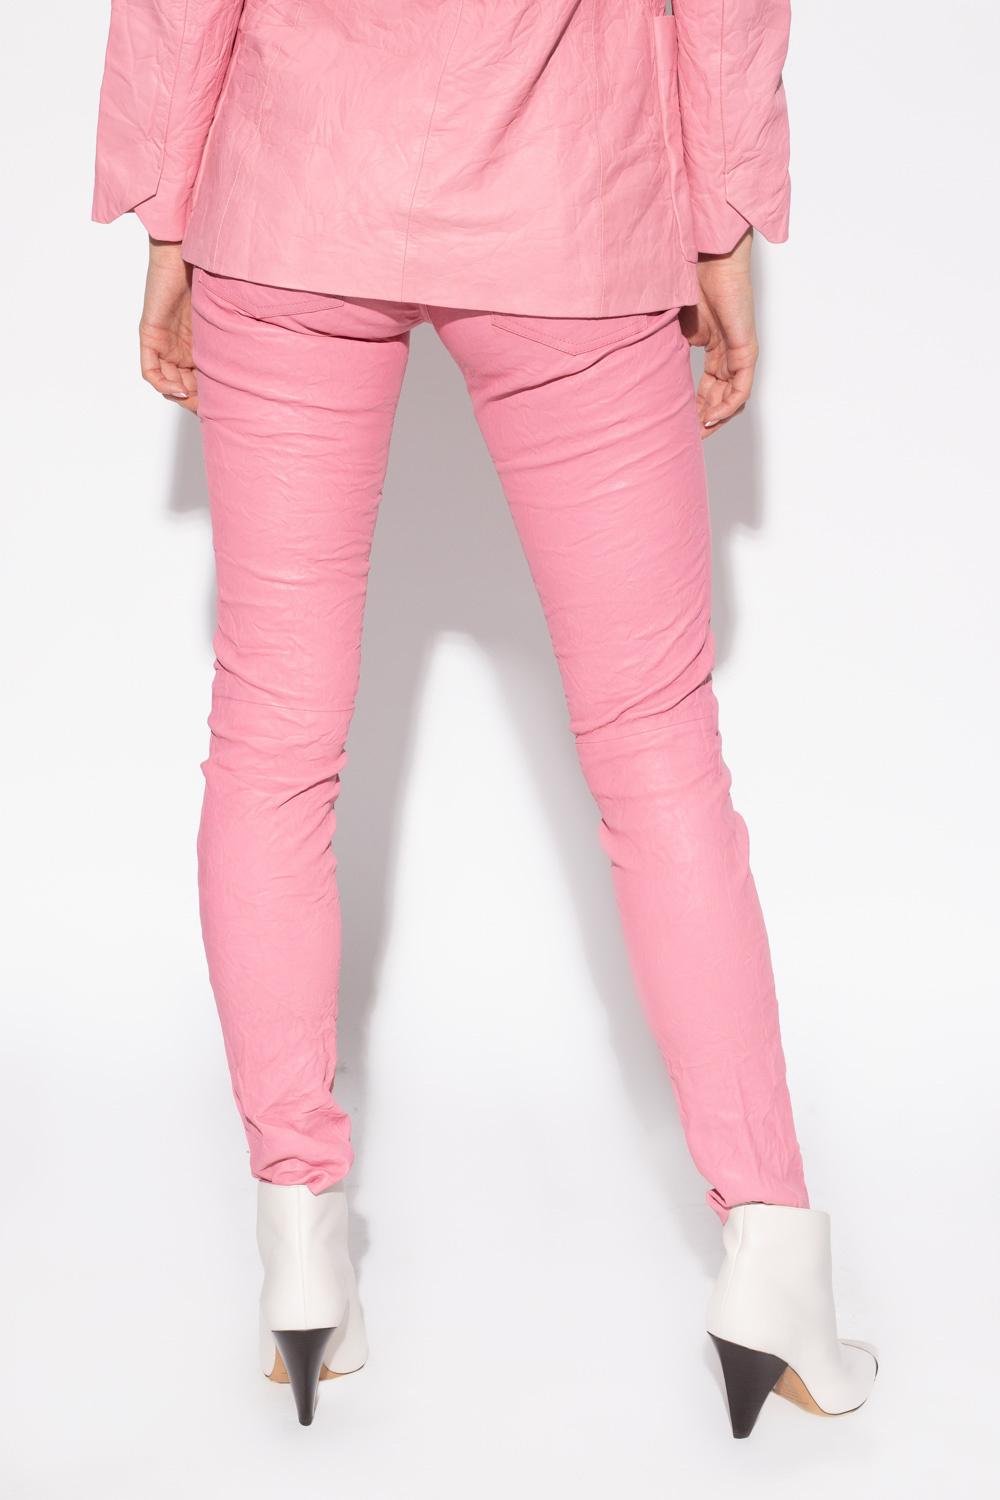 Zadig & Voltaire 'phlame' Leather Trousers in Pink | Lyst